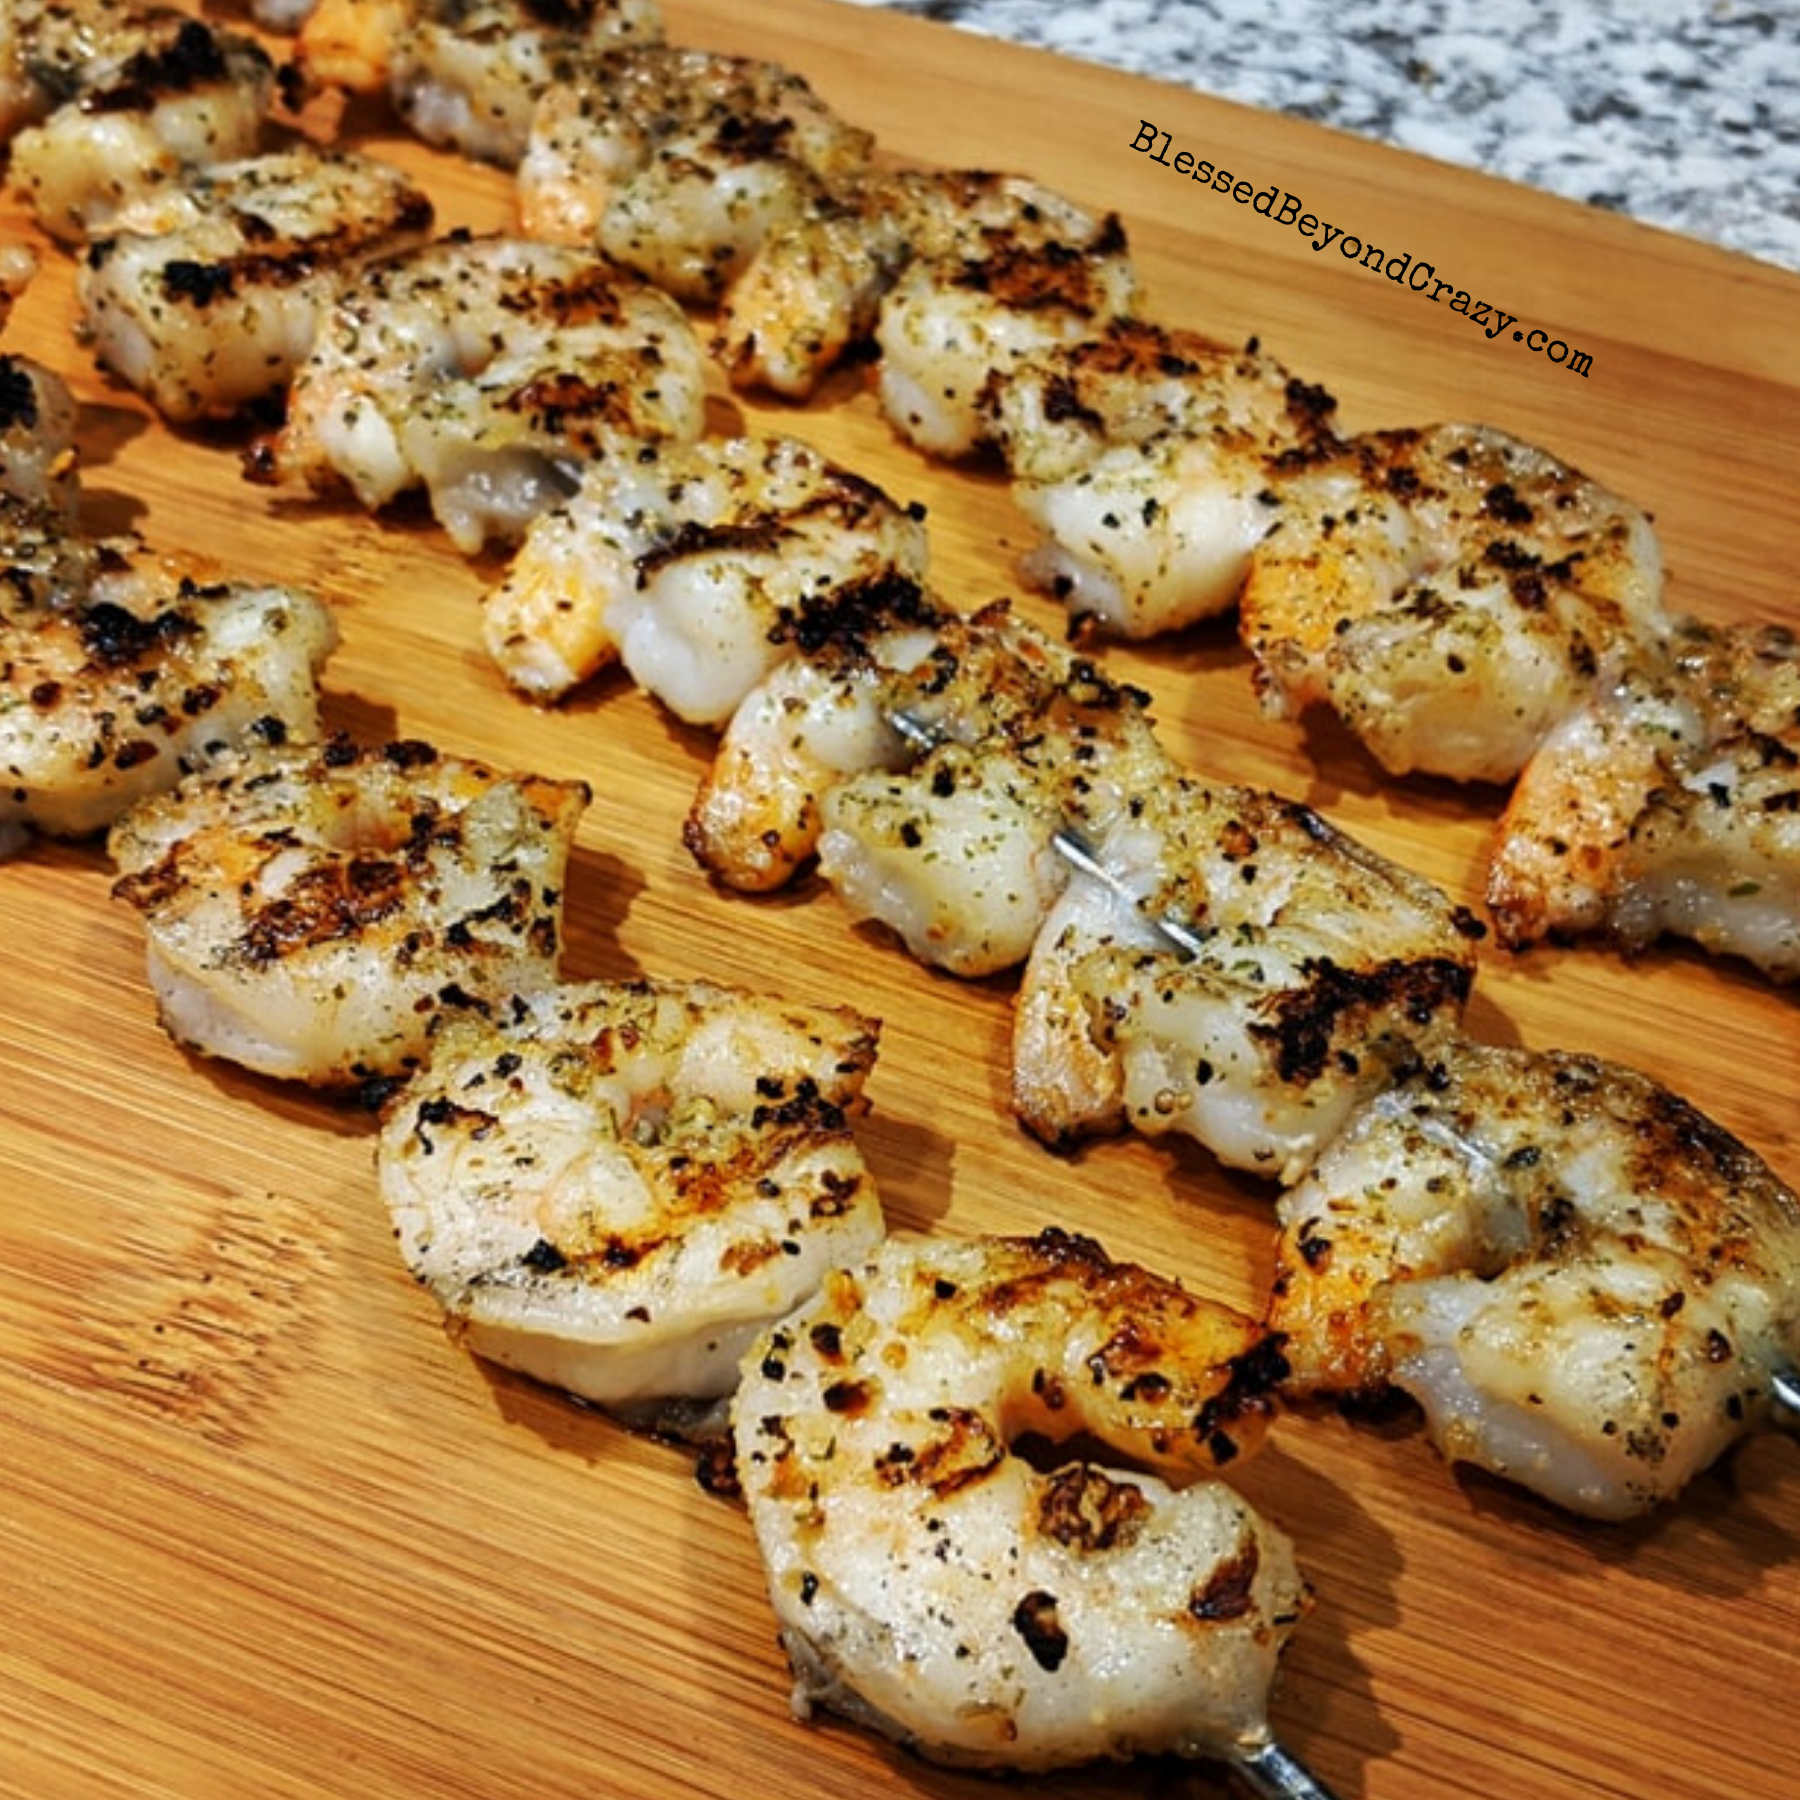 Grilled Shrimp with Garlic Butter Sauce